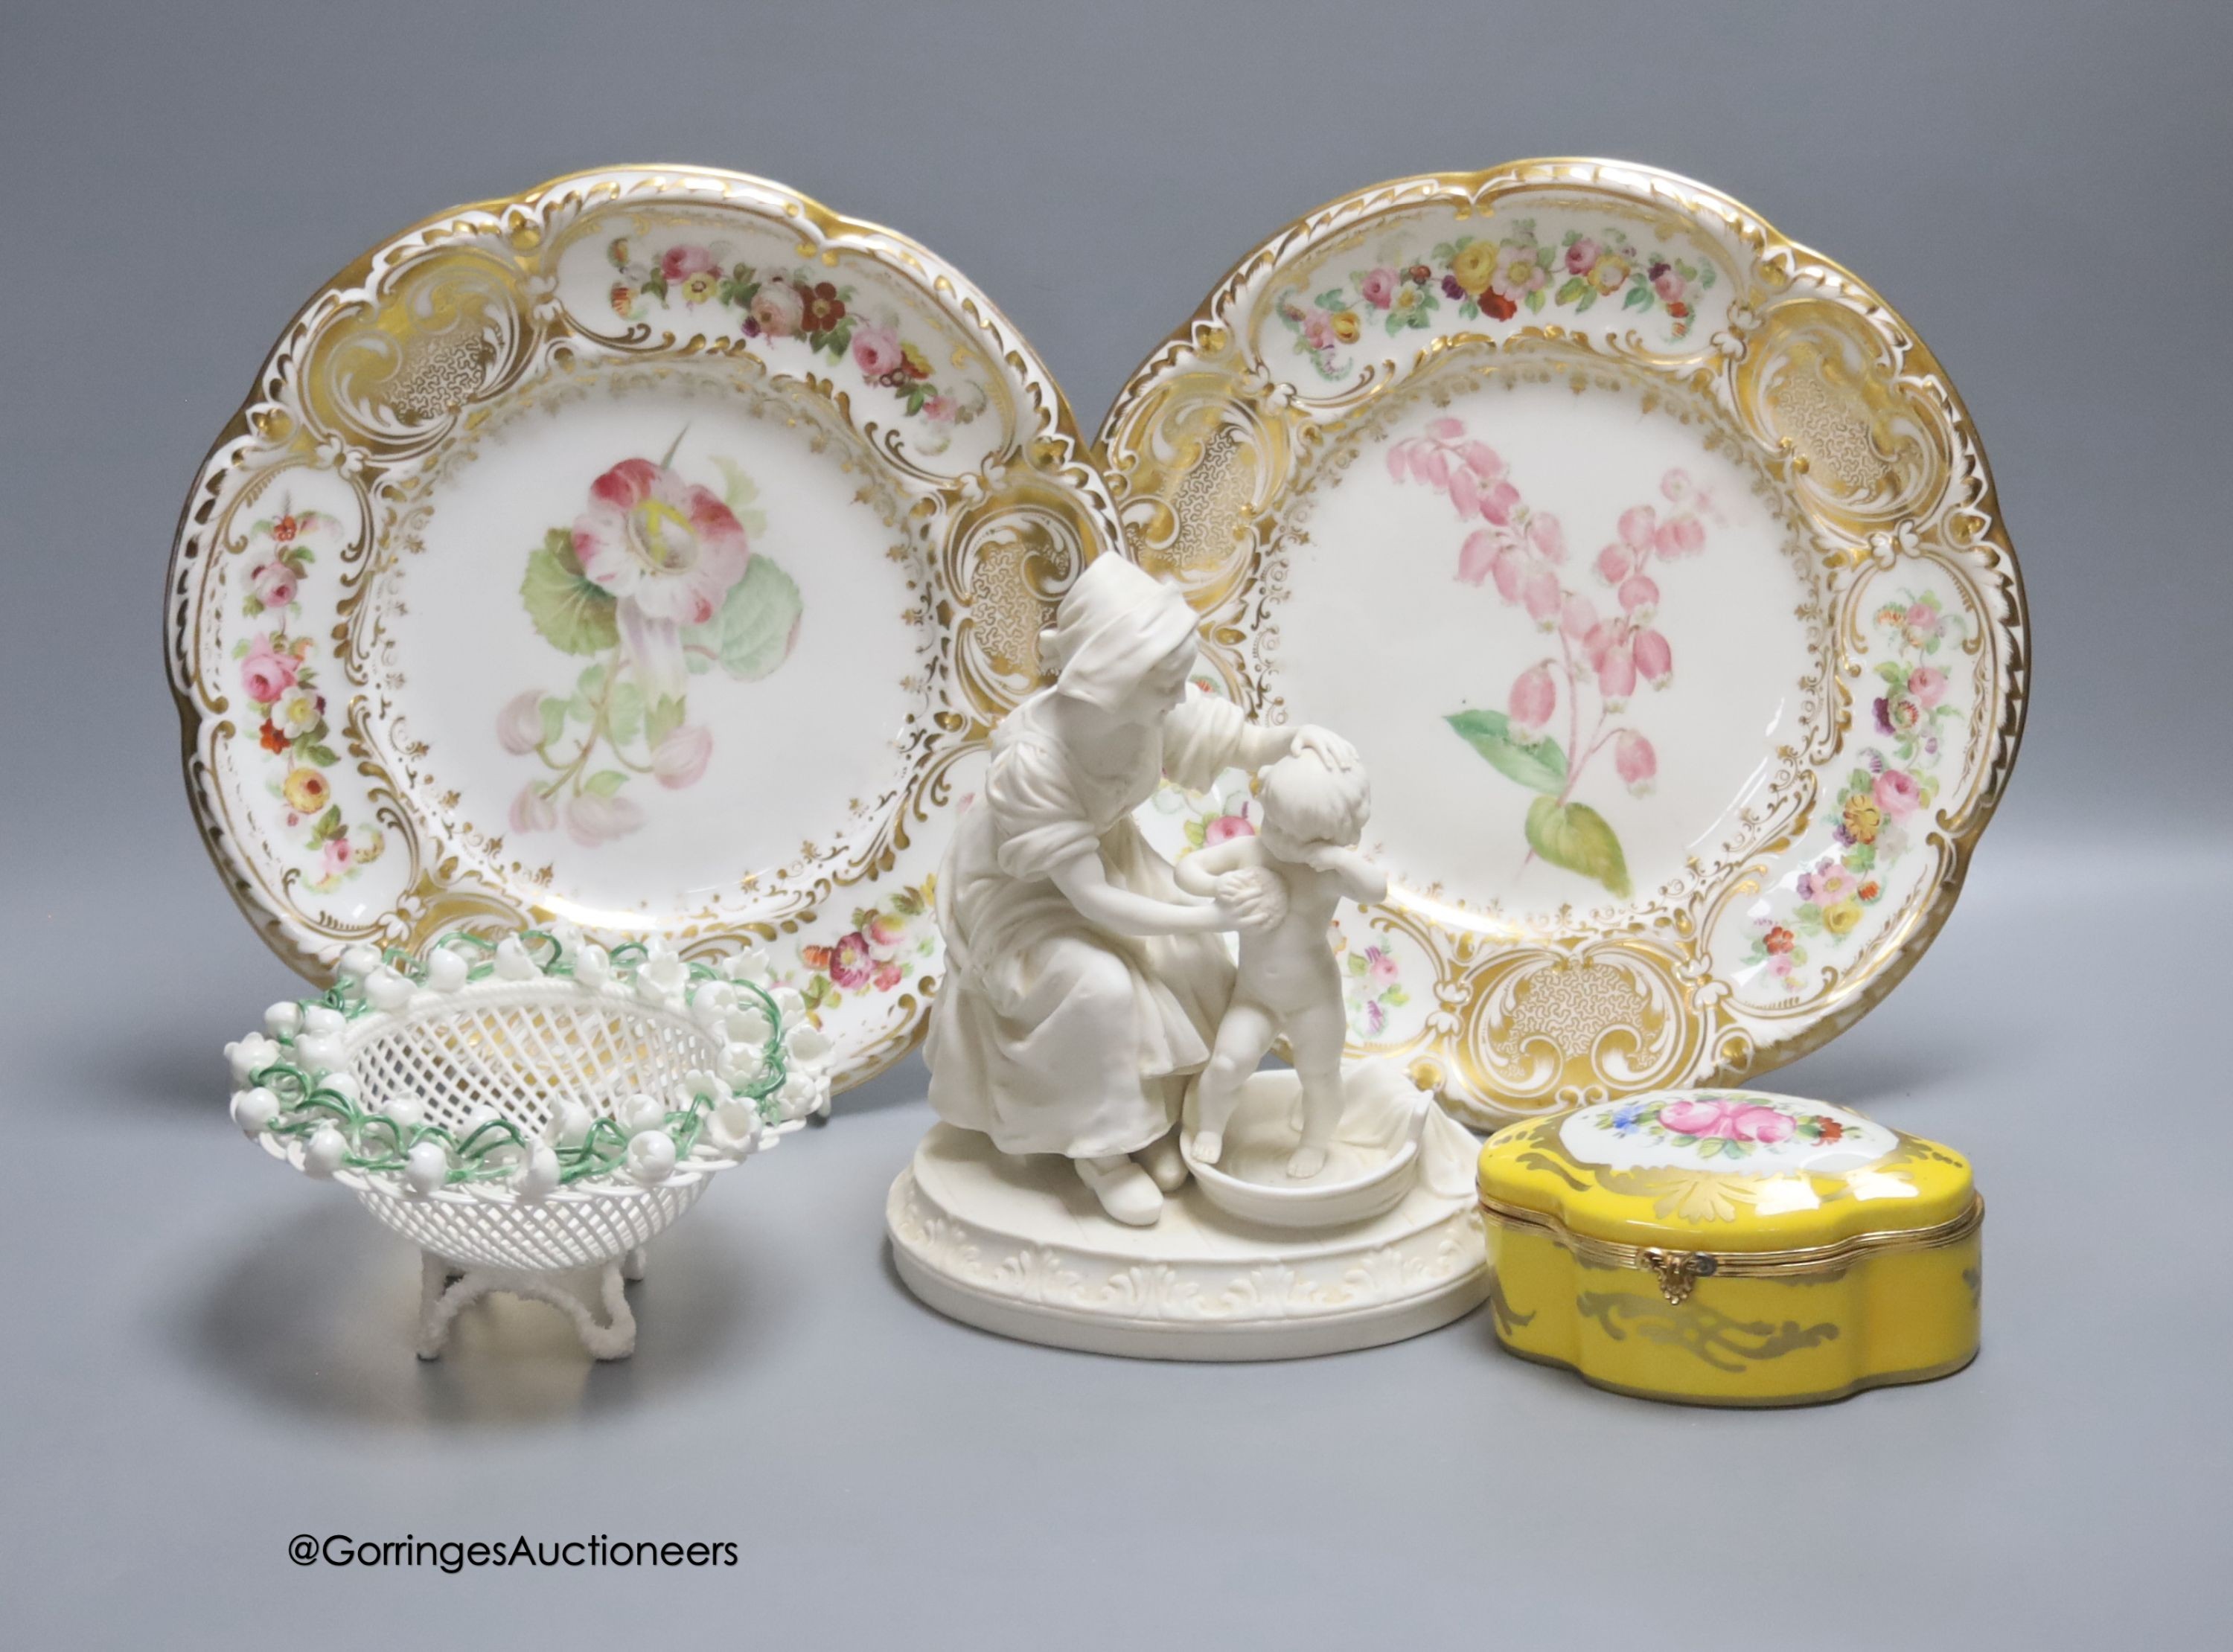 A pair Victorian dessert plates, a Parian Ware group, 'Bathtime', a Limoges box with hinged cover